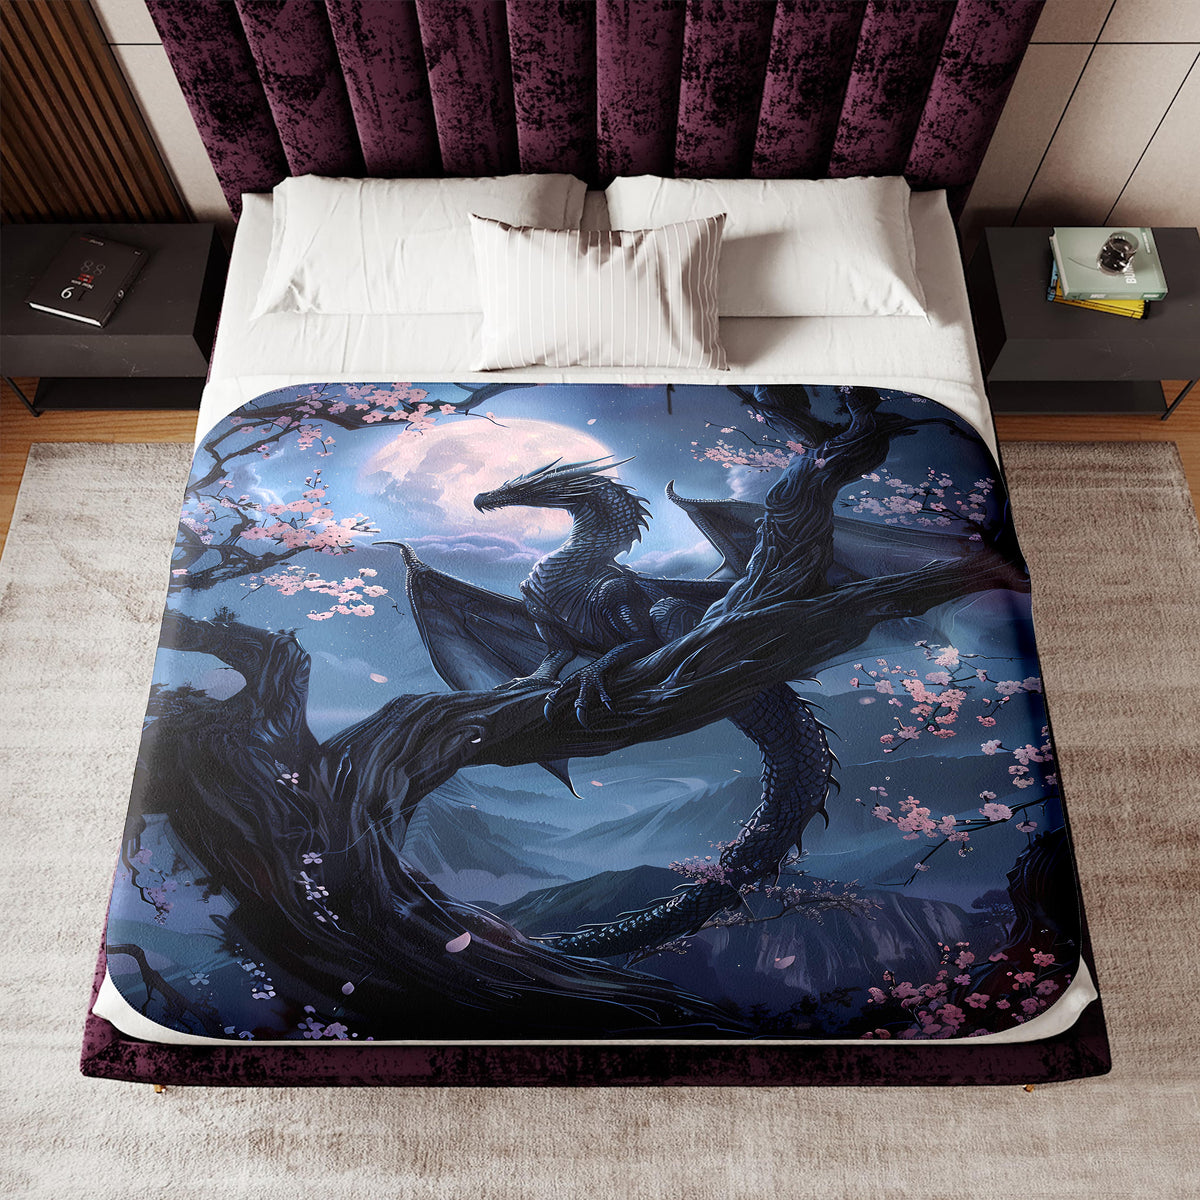 a bed with a dragon design on it